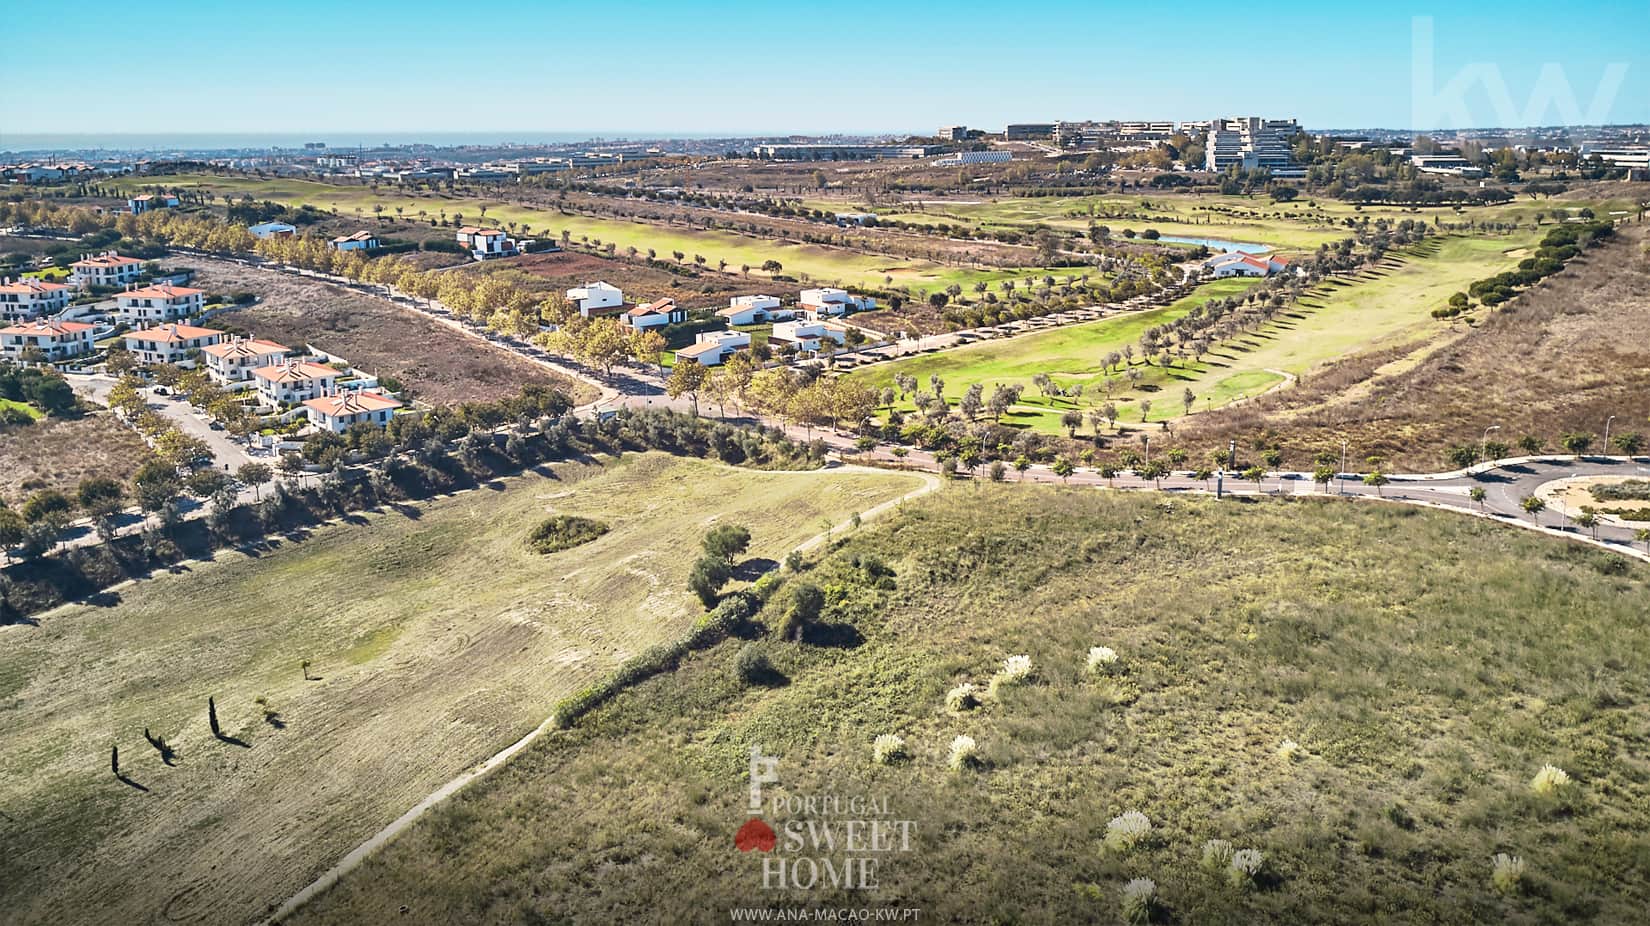 View of the residential area of Oeiras Golf & Residence